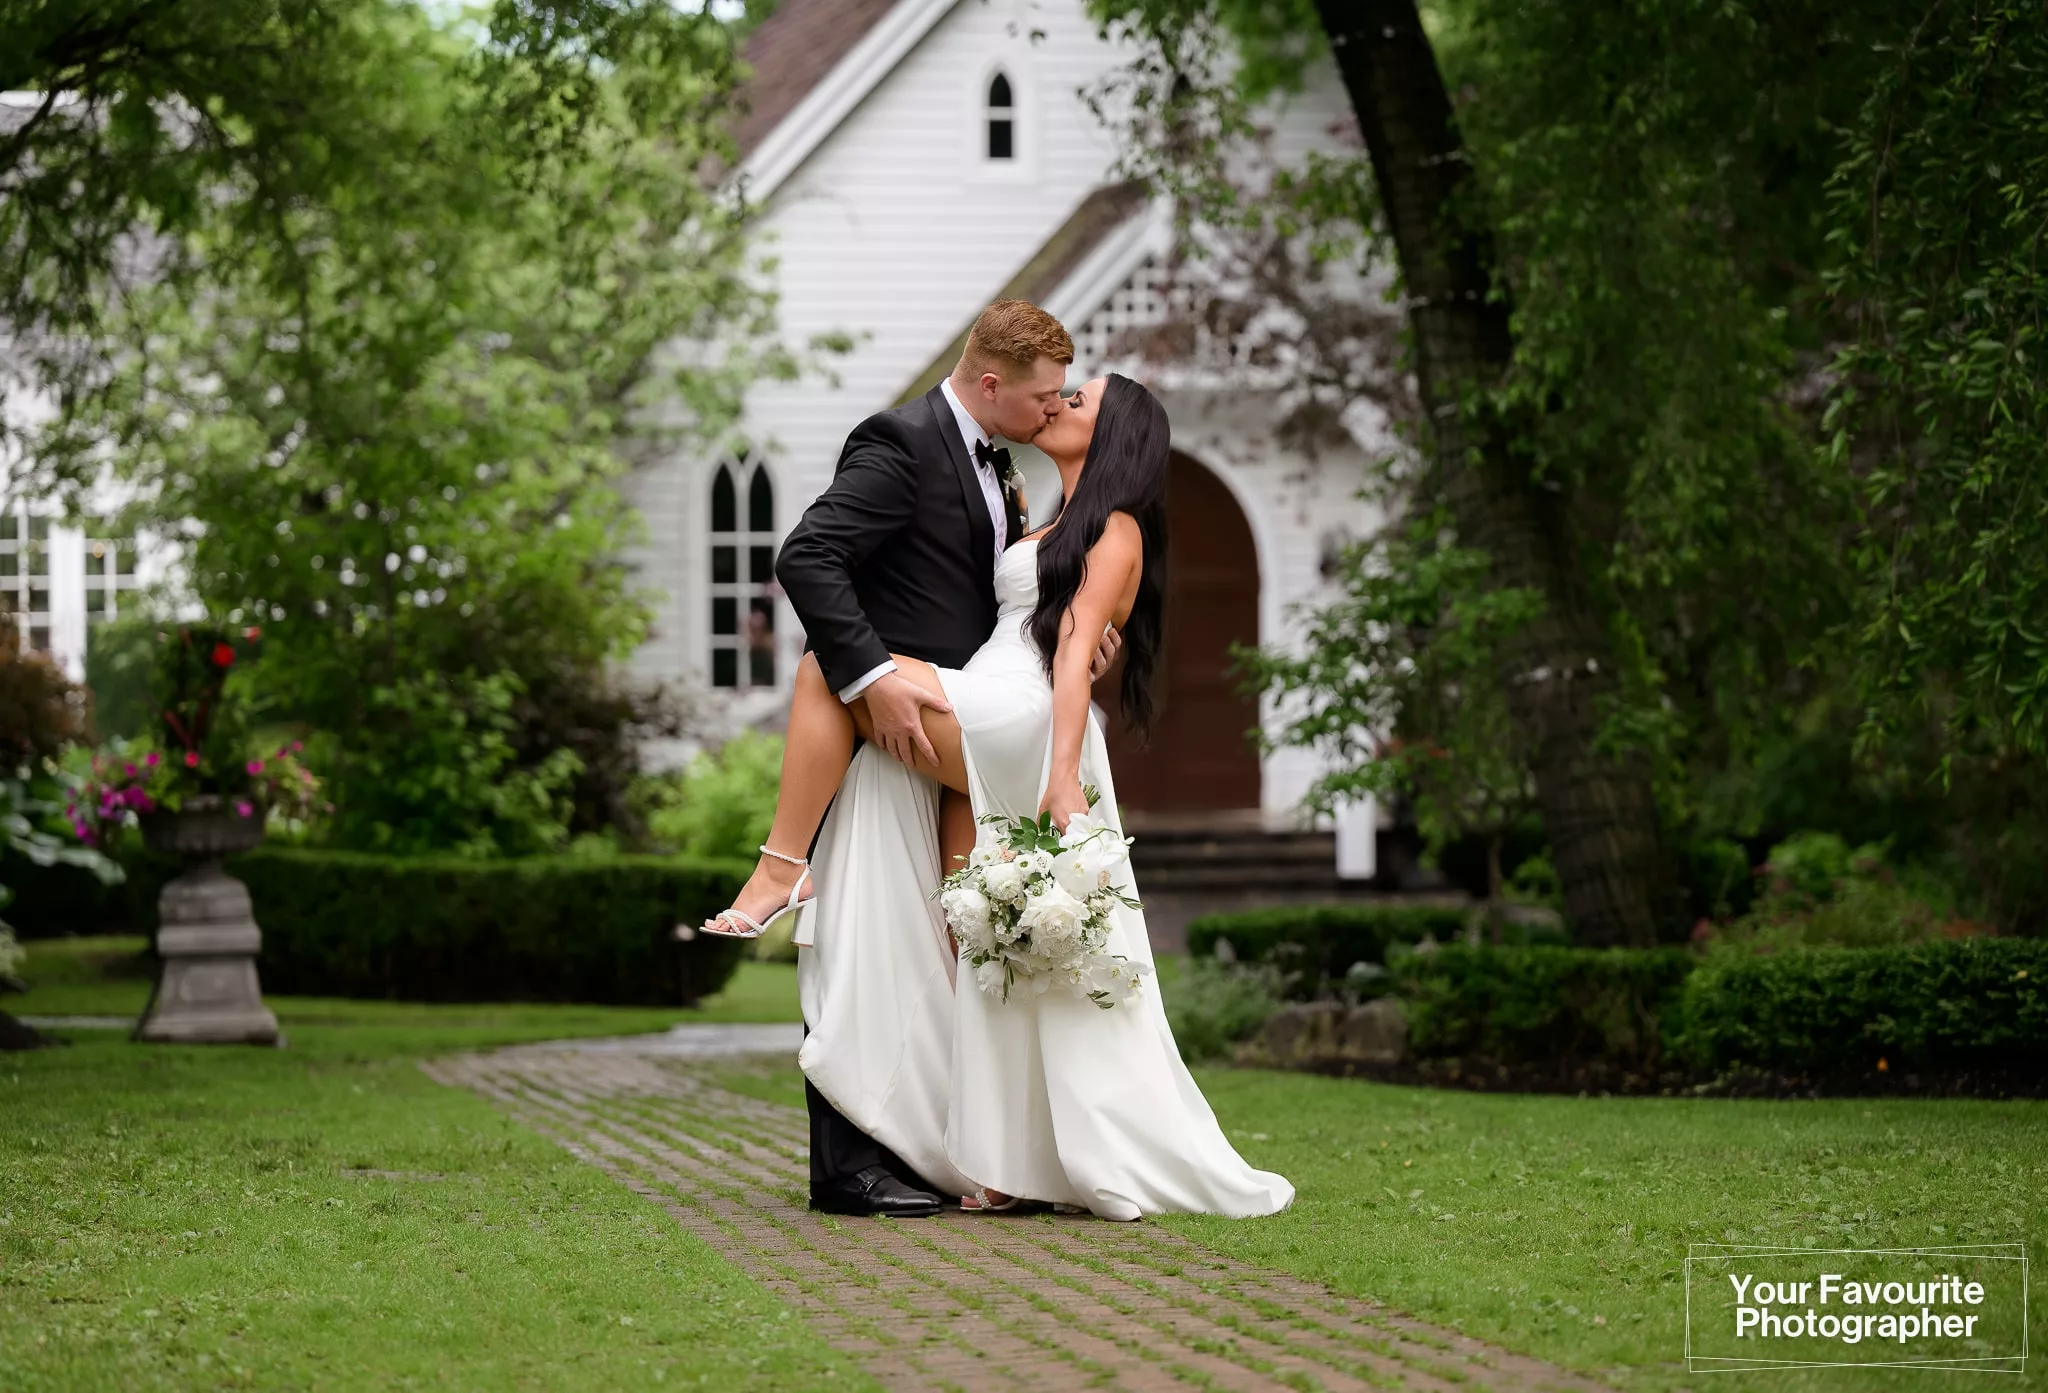 Samantha and Robert posing outside the chapel at The Doctor's House on their wedding day, sharing a kiss with a dip